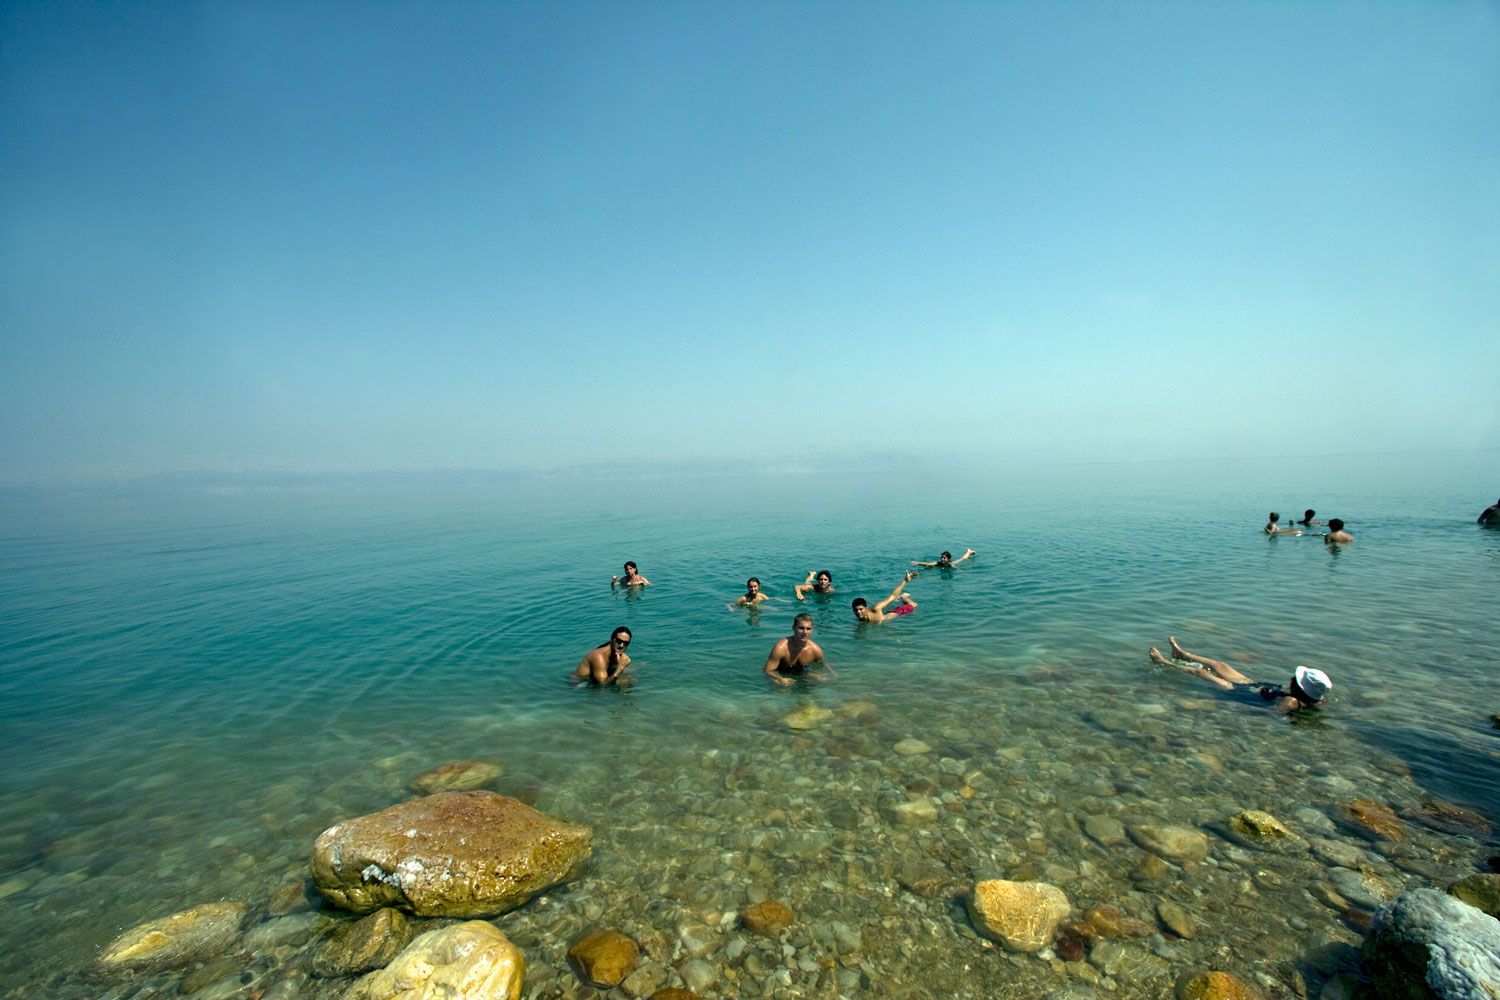 Floating on the Dead Sea